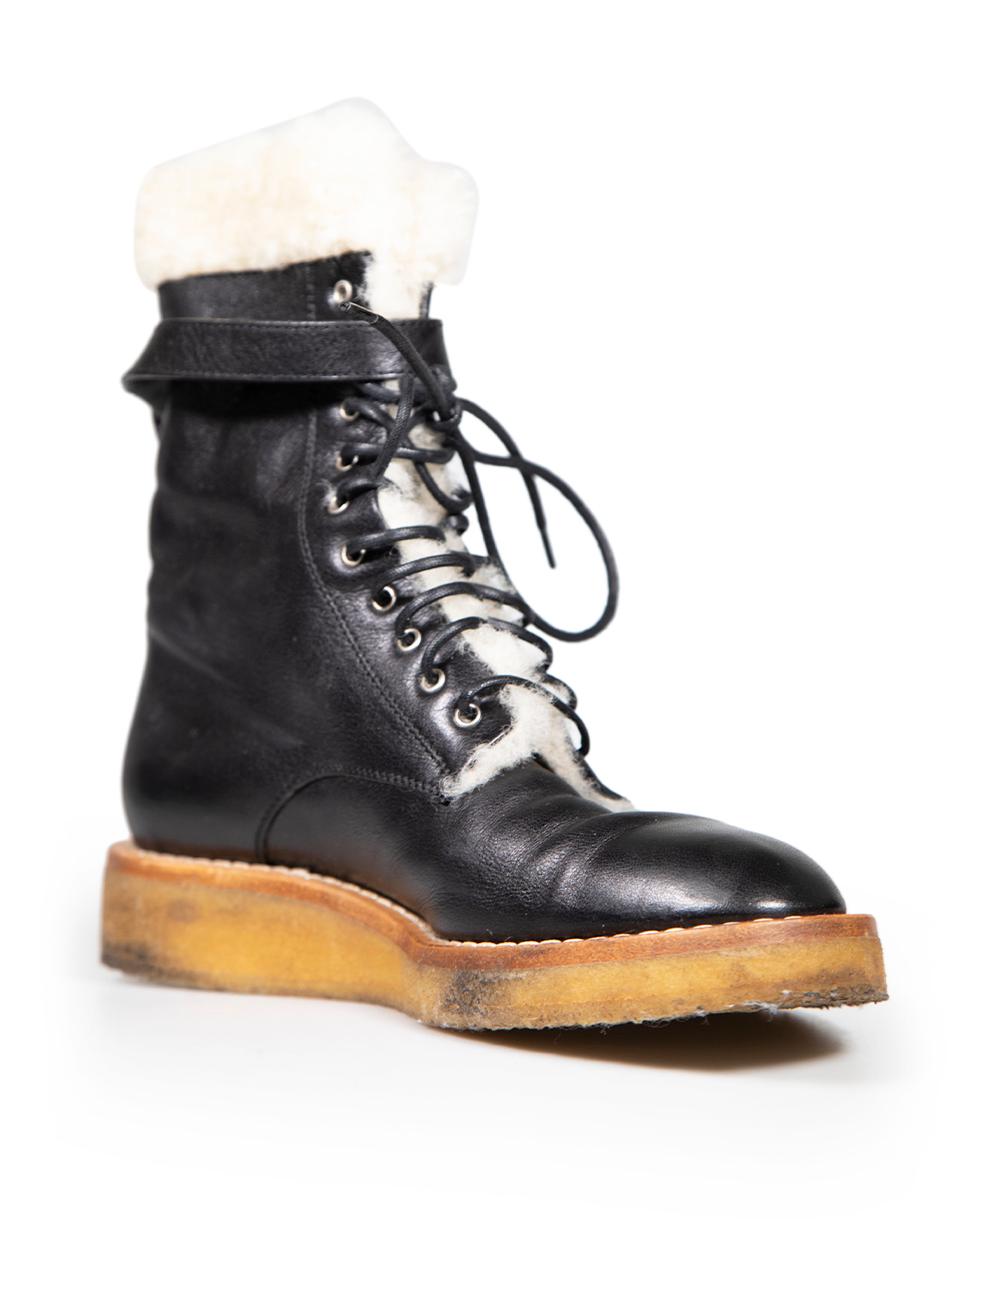 CONDITION is Good. Minor wear to boots is evident. Light wear to both boot rubber outsoles with dark marks to the rubber on this used Céline designer resale item. These boots come with original dust bag.
 
 Details
 Black
 Leather
 Biker boots
